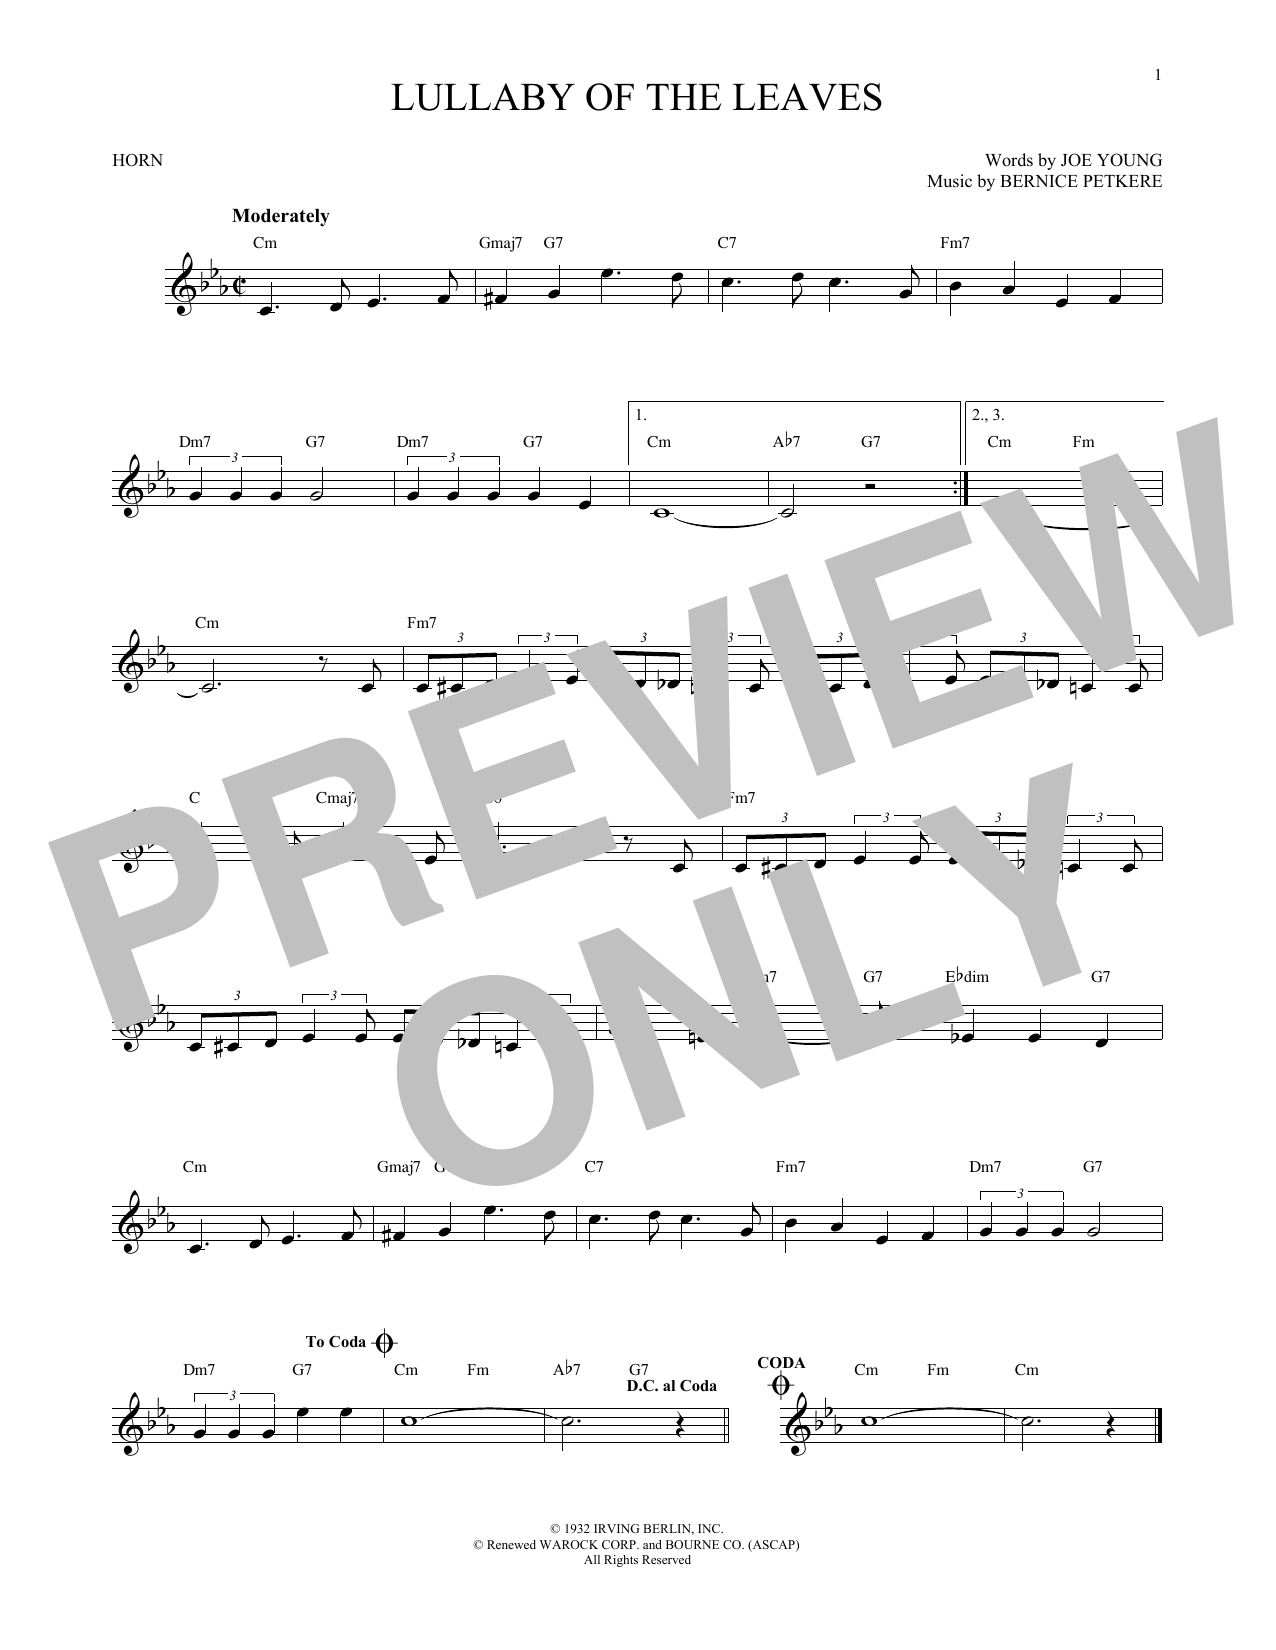 Download Bernice Petkere Lullaby Of The Leaves Sheet Music